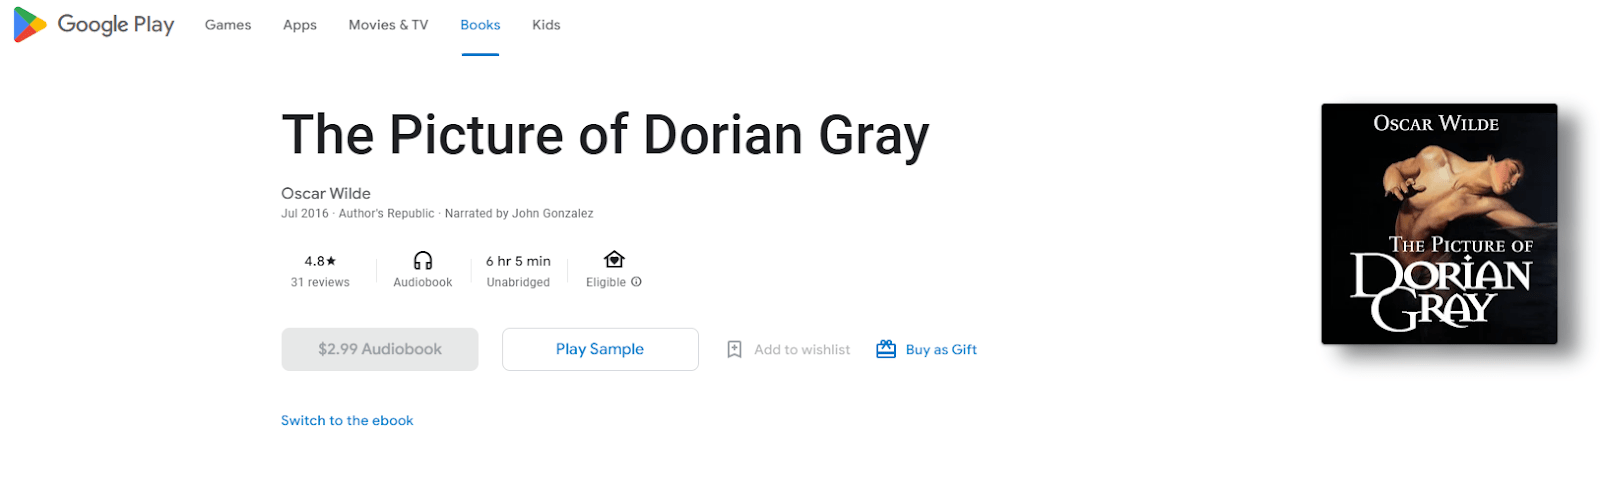 The Picture of Dorian Gray audiobook on available on Google Play Books